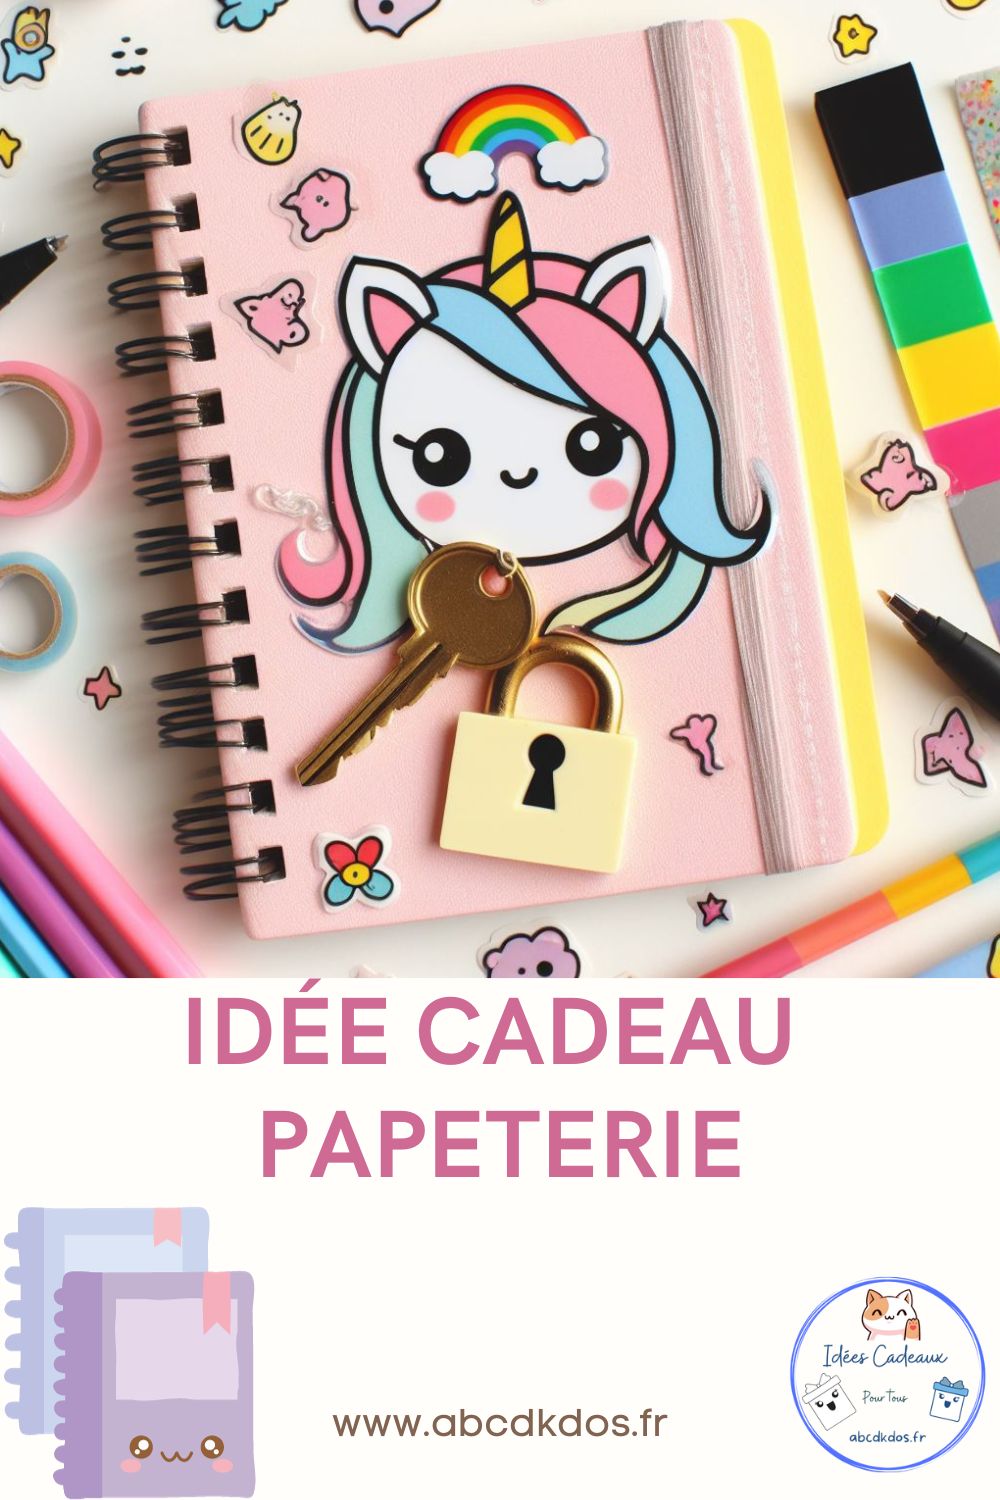 You are currently viewing Idée cadeau petite papeterie